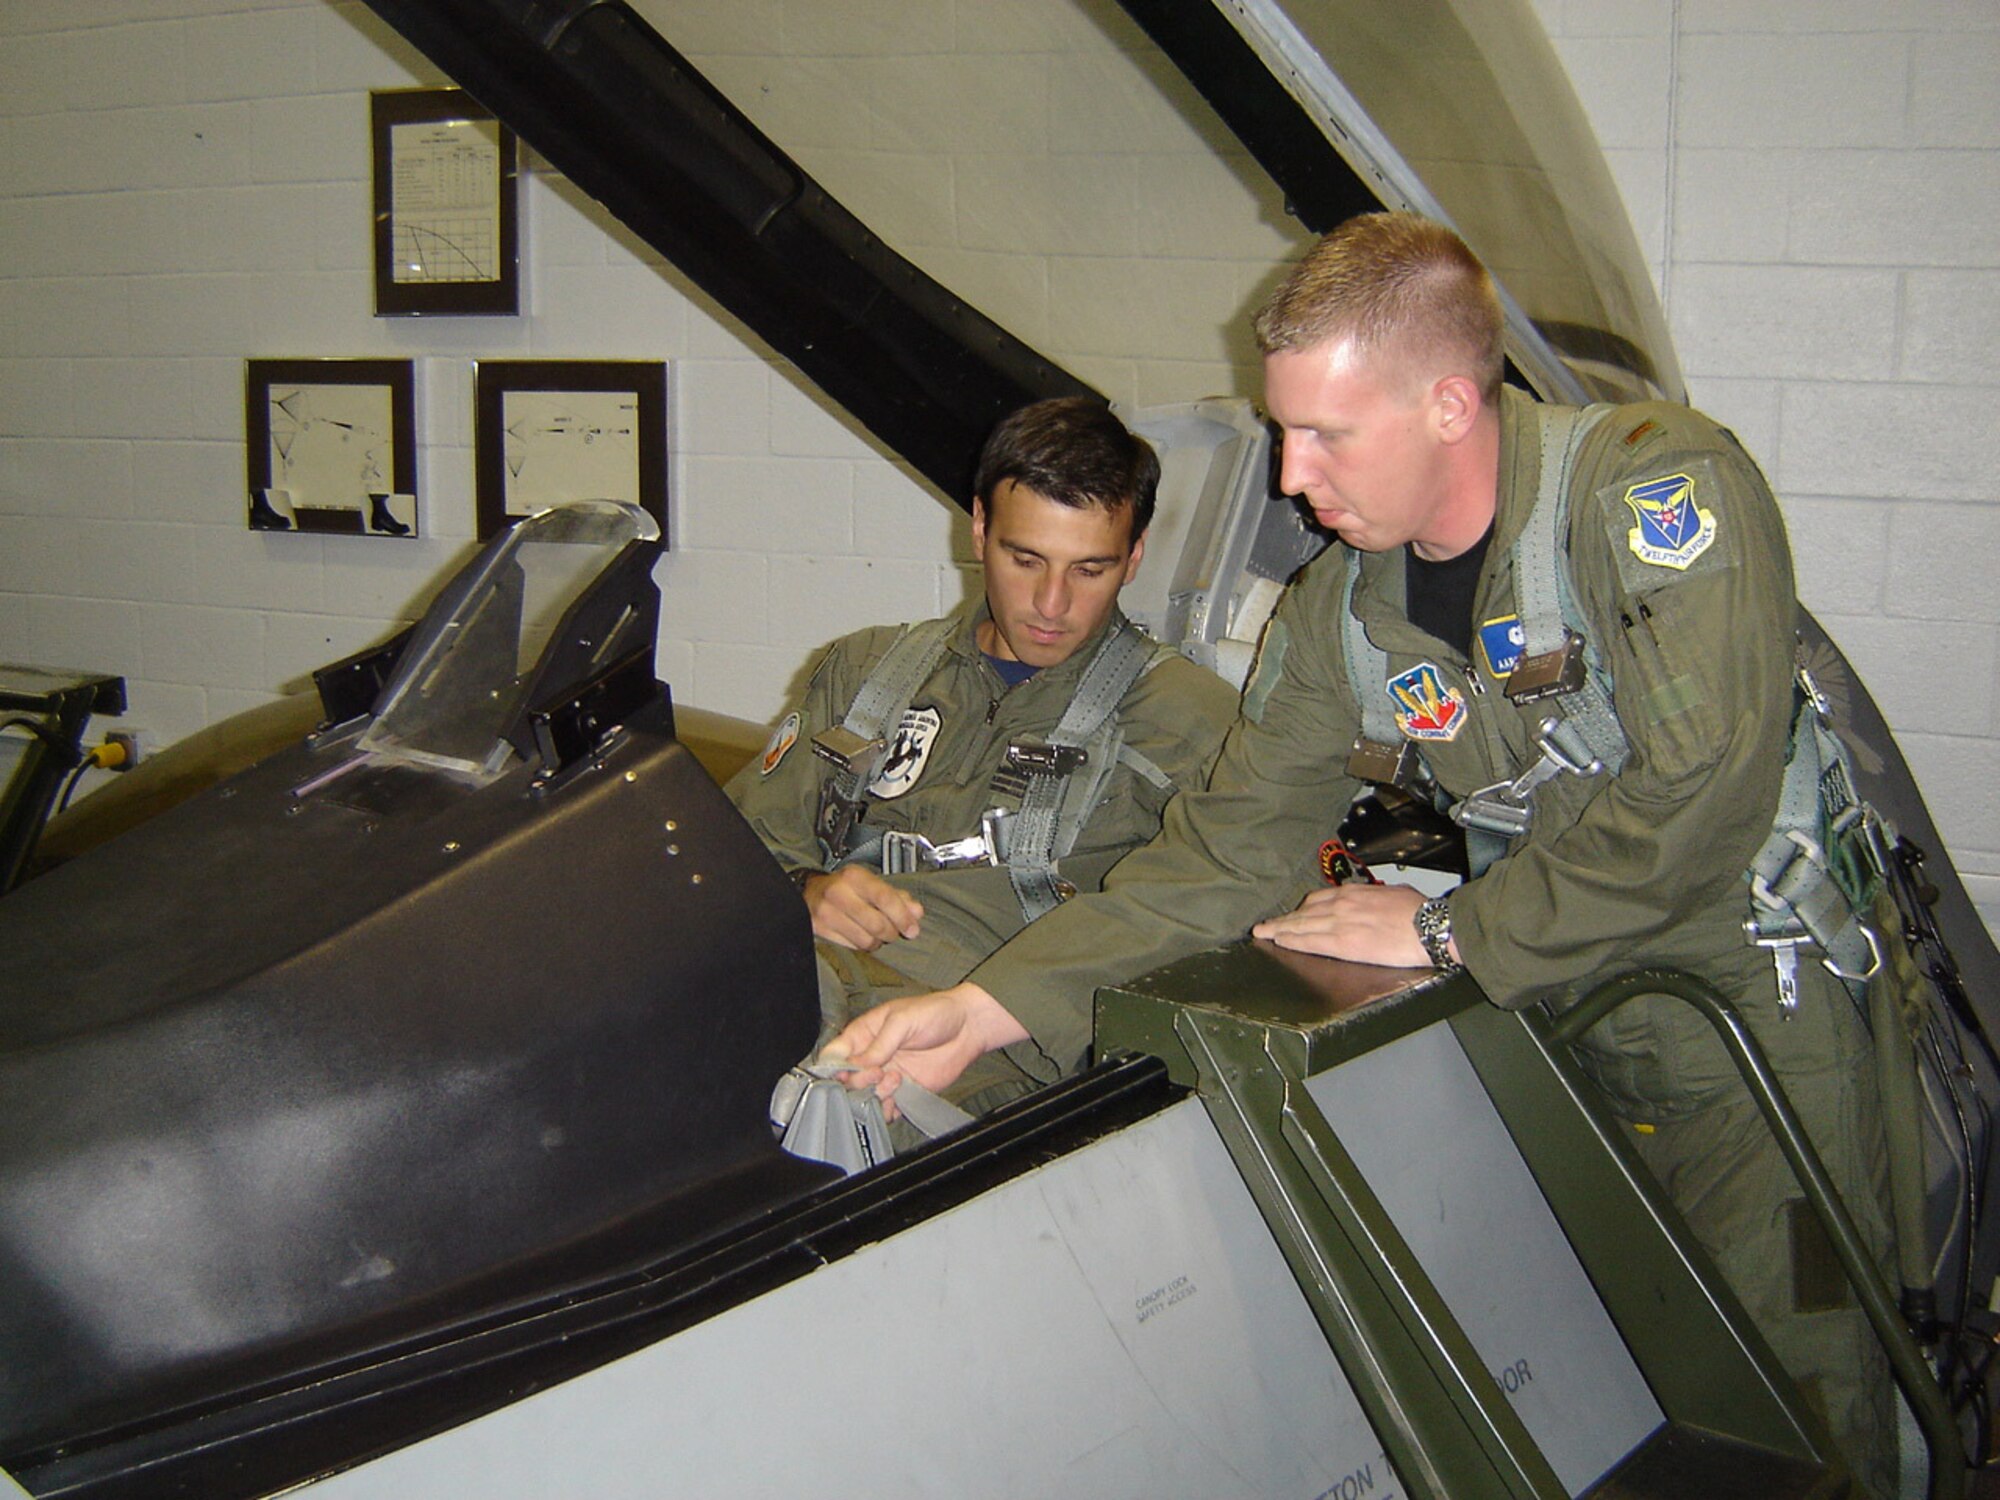 Lt. Aaron Schuett, a Desk Officer with 12th Air Force (Air Forces Southern), trains Capt. Carlos Martin, a member of the Argentine Air Force, in proper F-16 Fighter Falcon ejection procedures at Luke Air Force Base, Ariz. prior to his F-16 training mission. Captain Martin visited the United States to participate in a joint subject matter expert exchange program where he trained alongside U.S. Airmen in fighter operations Jan. 21-25.